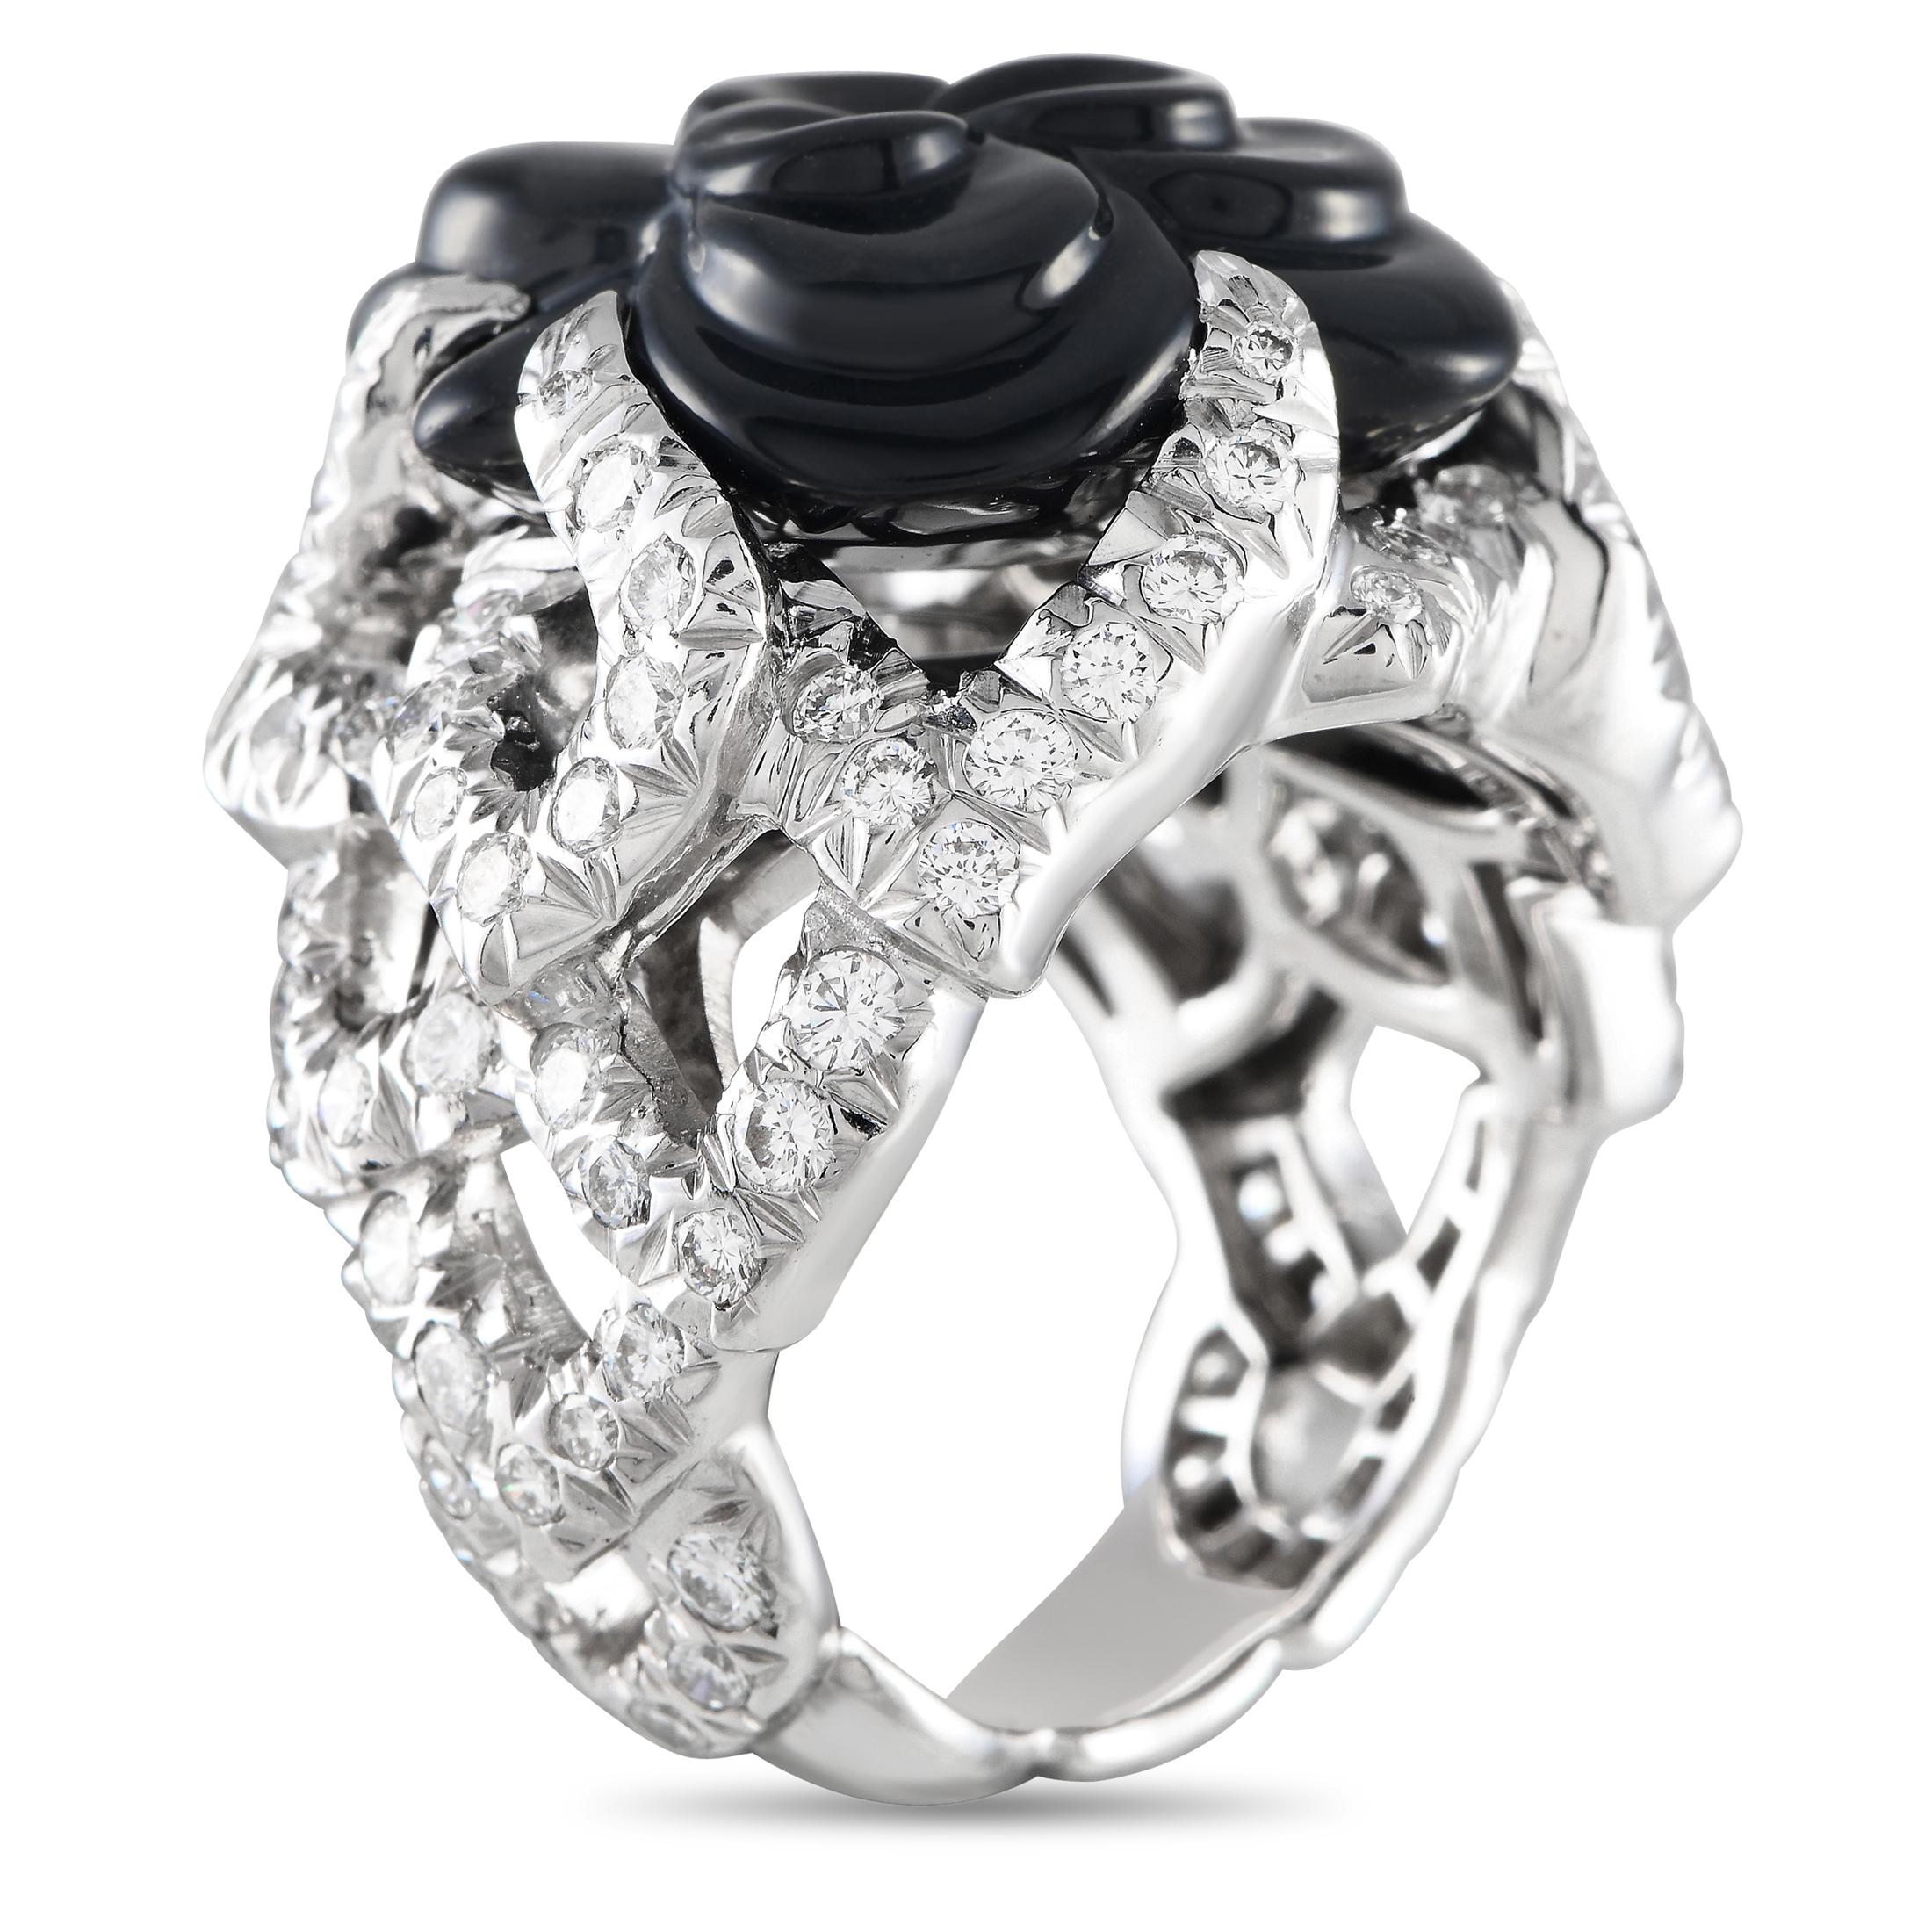 Keep your style blossoming year-round with this Chanel Camlia cocktail ring. This 18K white gold ring bears a carved onyx camellia flower that sprouts from a bush of round brilliant cut diamonds. This statement-making ring will give any special